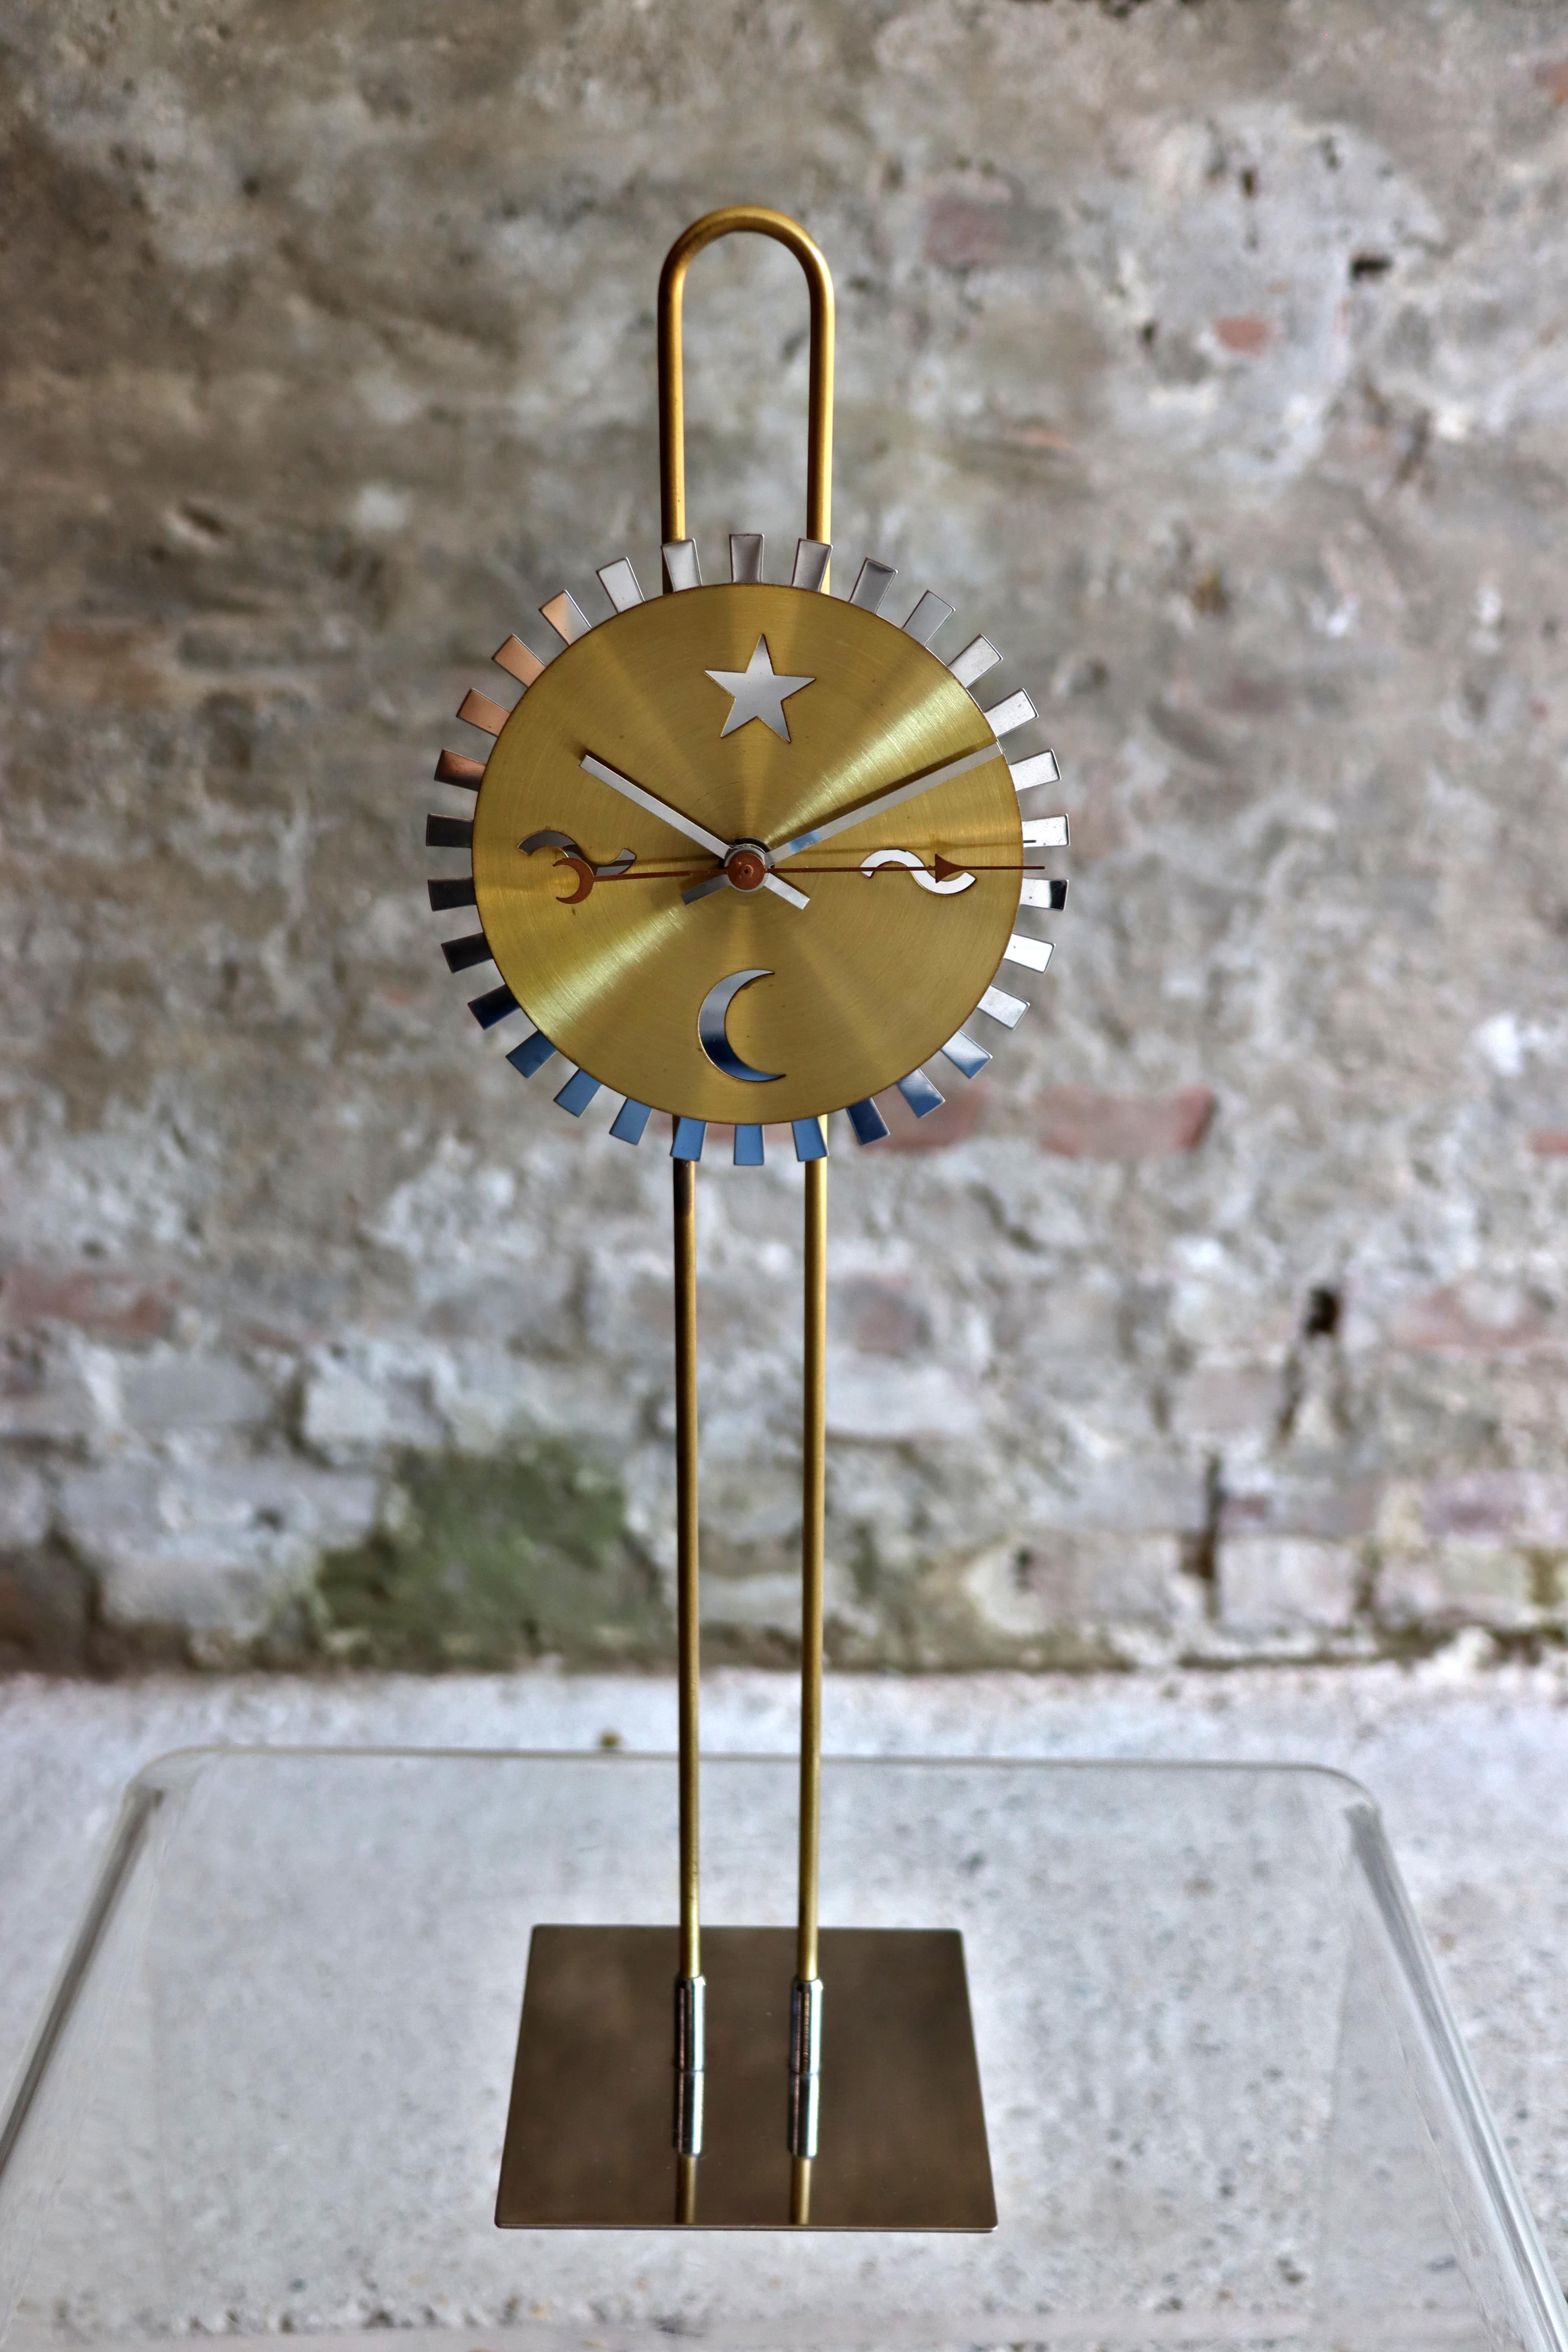 This cool clock is called Dilla and is designed by Ehlén Johansson for IKEA. It was first listed in the 1995 catalogue. It’s made from brass and solid stainless steel. The height of the clock is adjustable.

